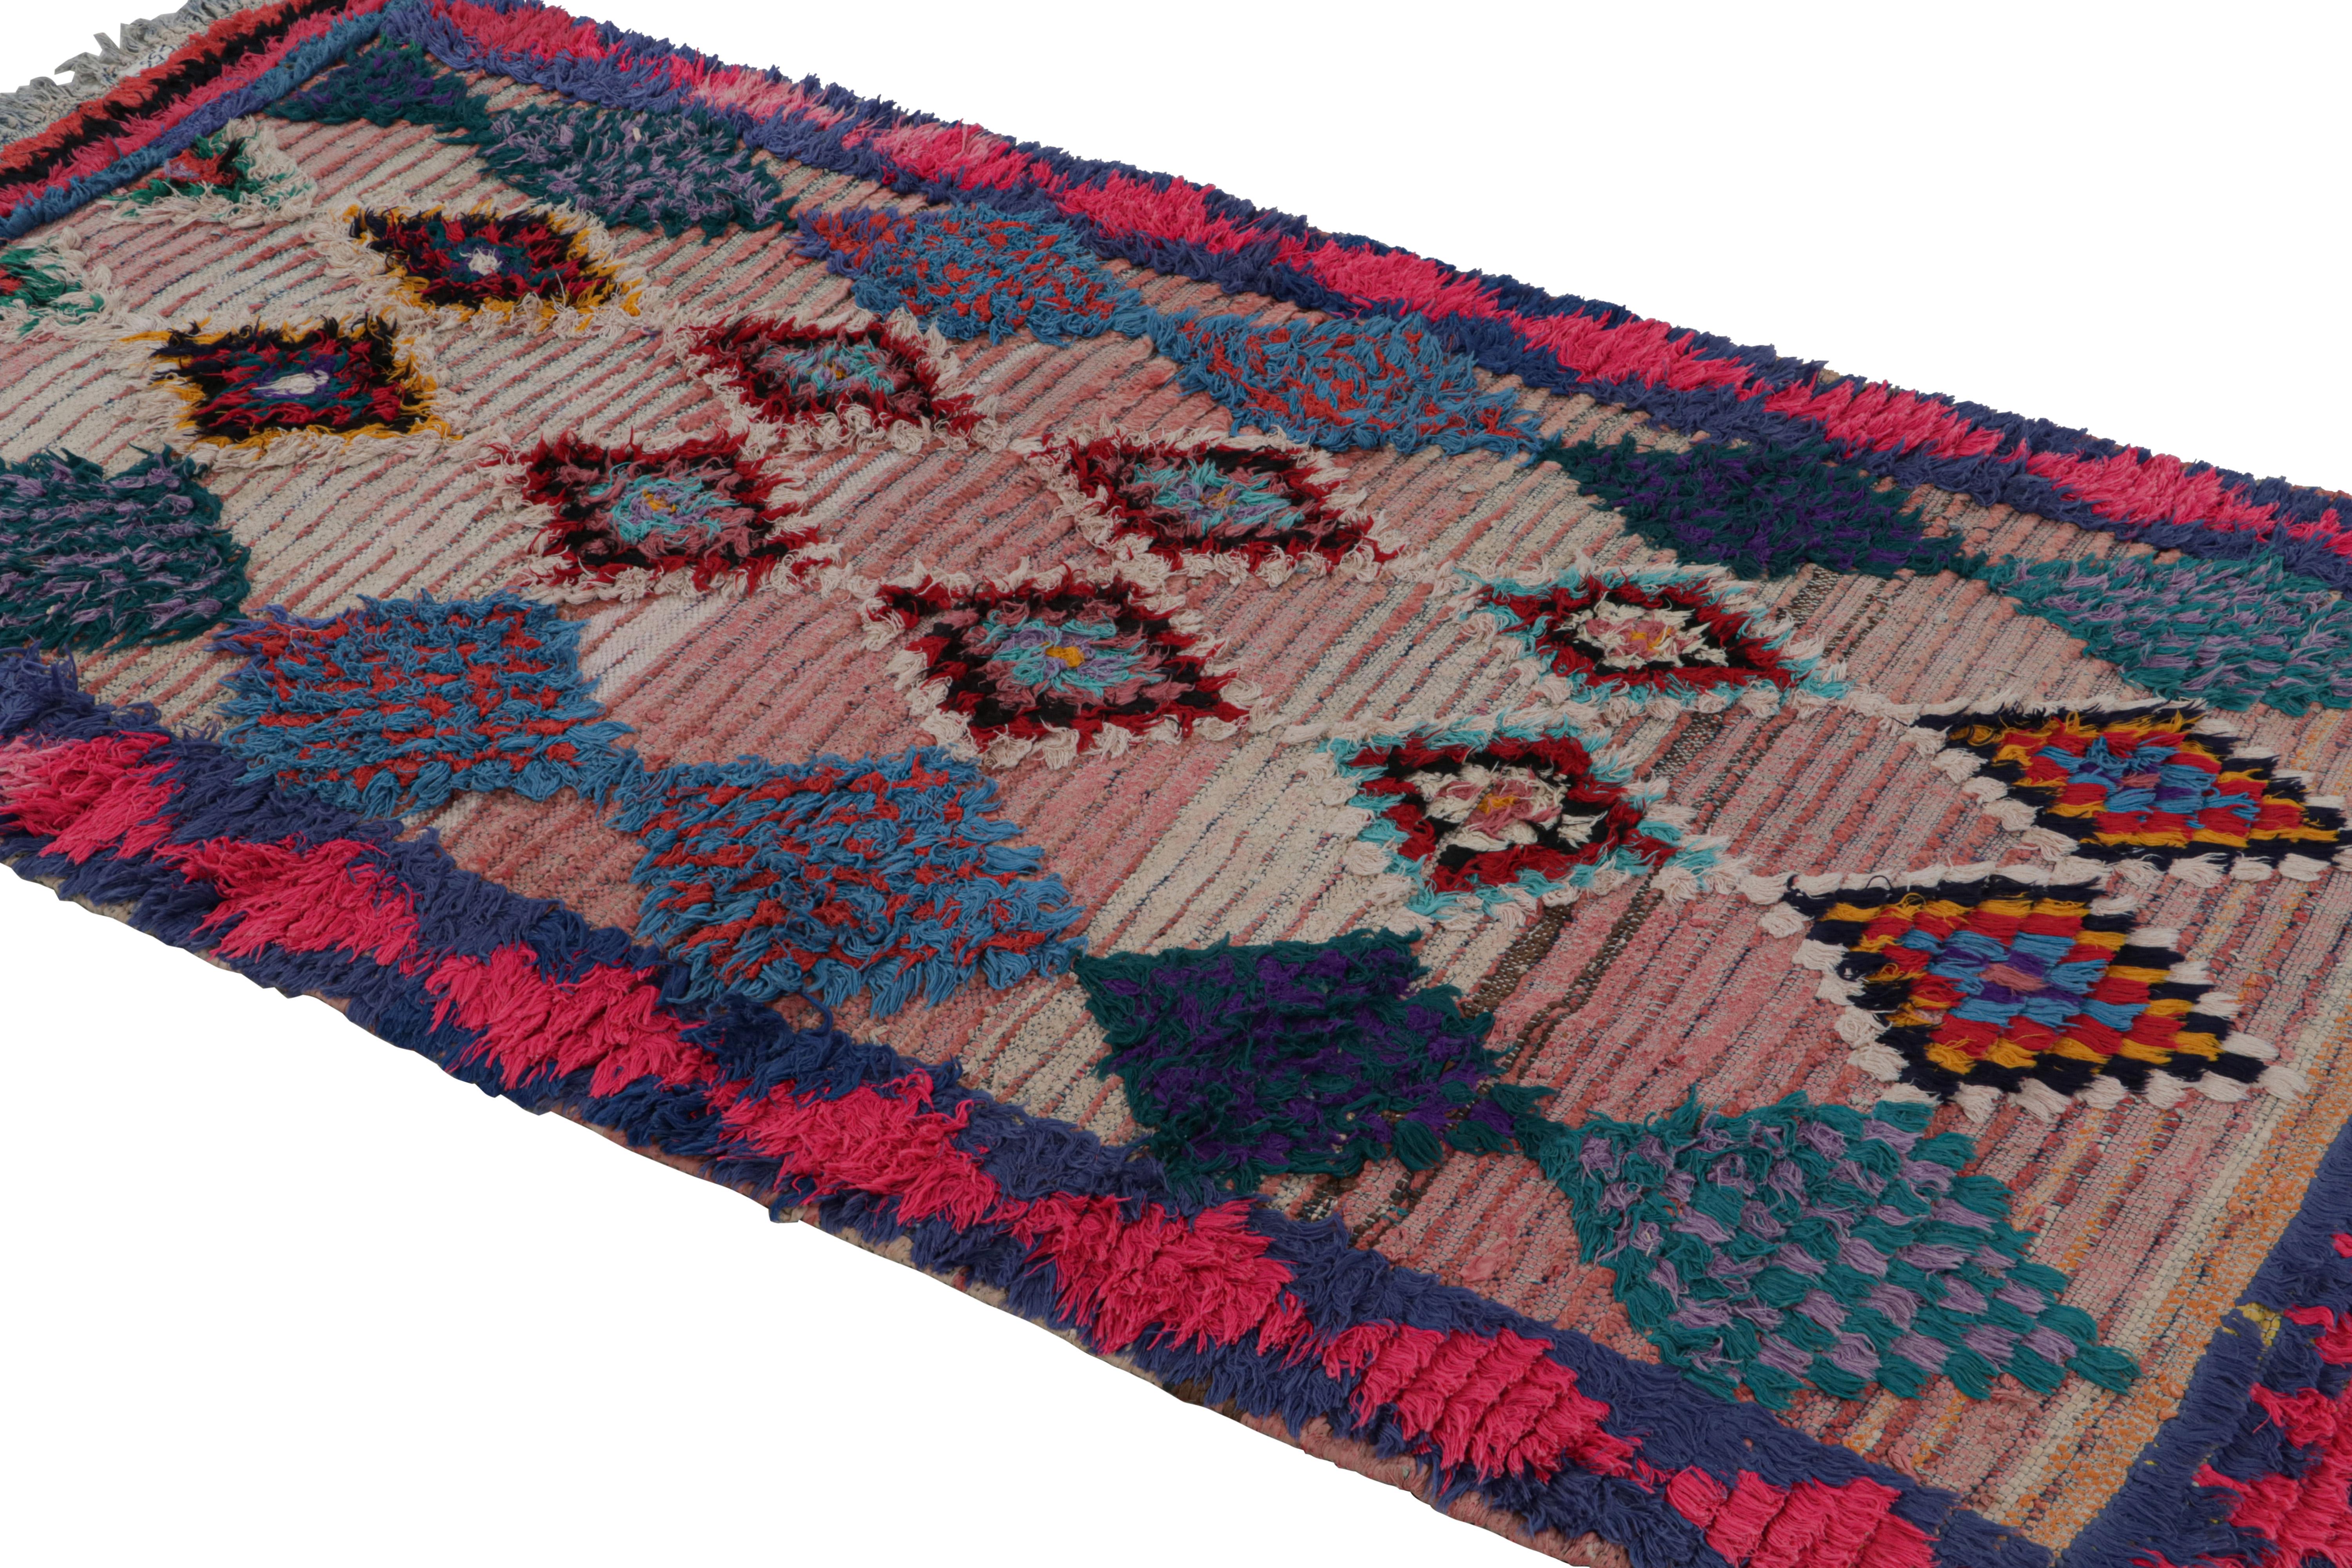 Hand-knotted in wool circa 1950-1960, this vintage 4x8 Moroccan rug is believed to hail from the Azilal tribe. 

On the Design: 

This rug enjoys pink and blue diamond patterns with red juxtapositions. Keen eyes will further admire its healthy